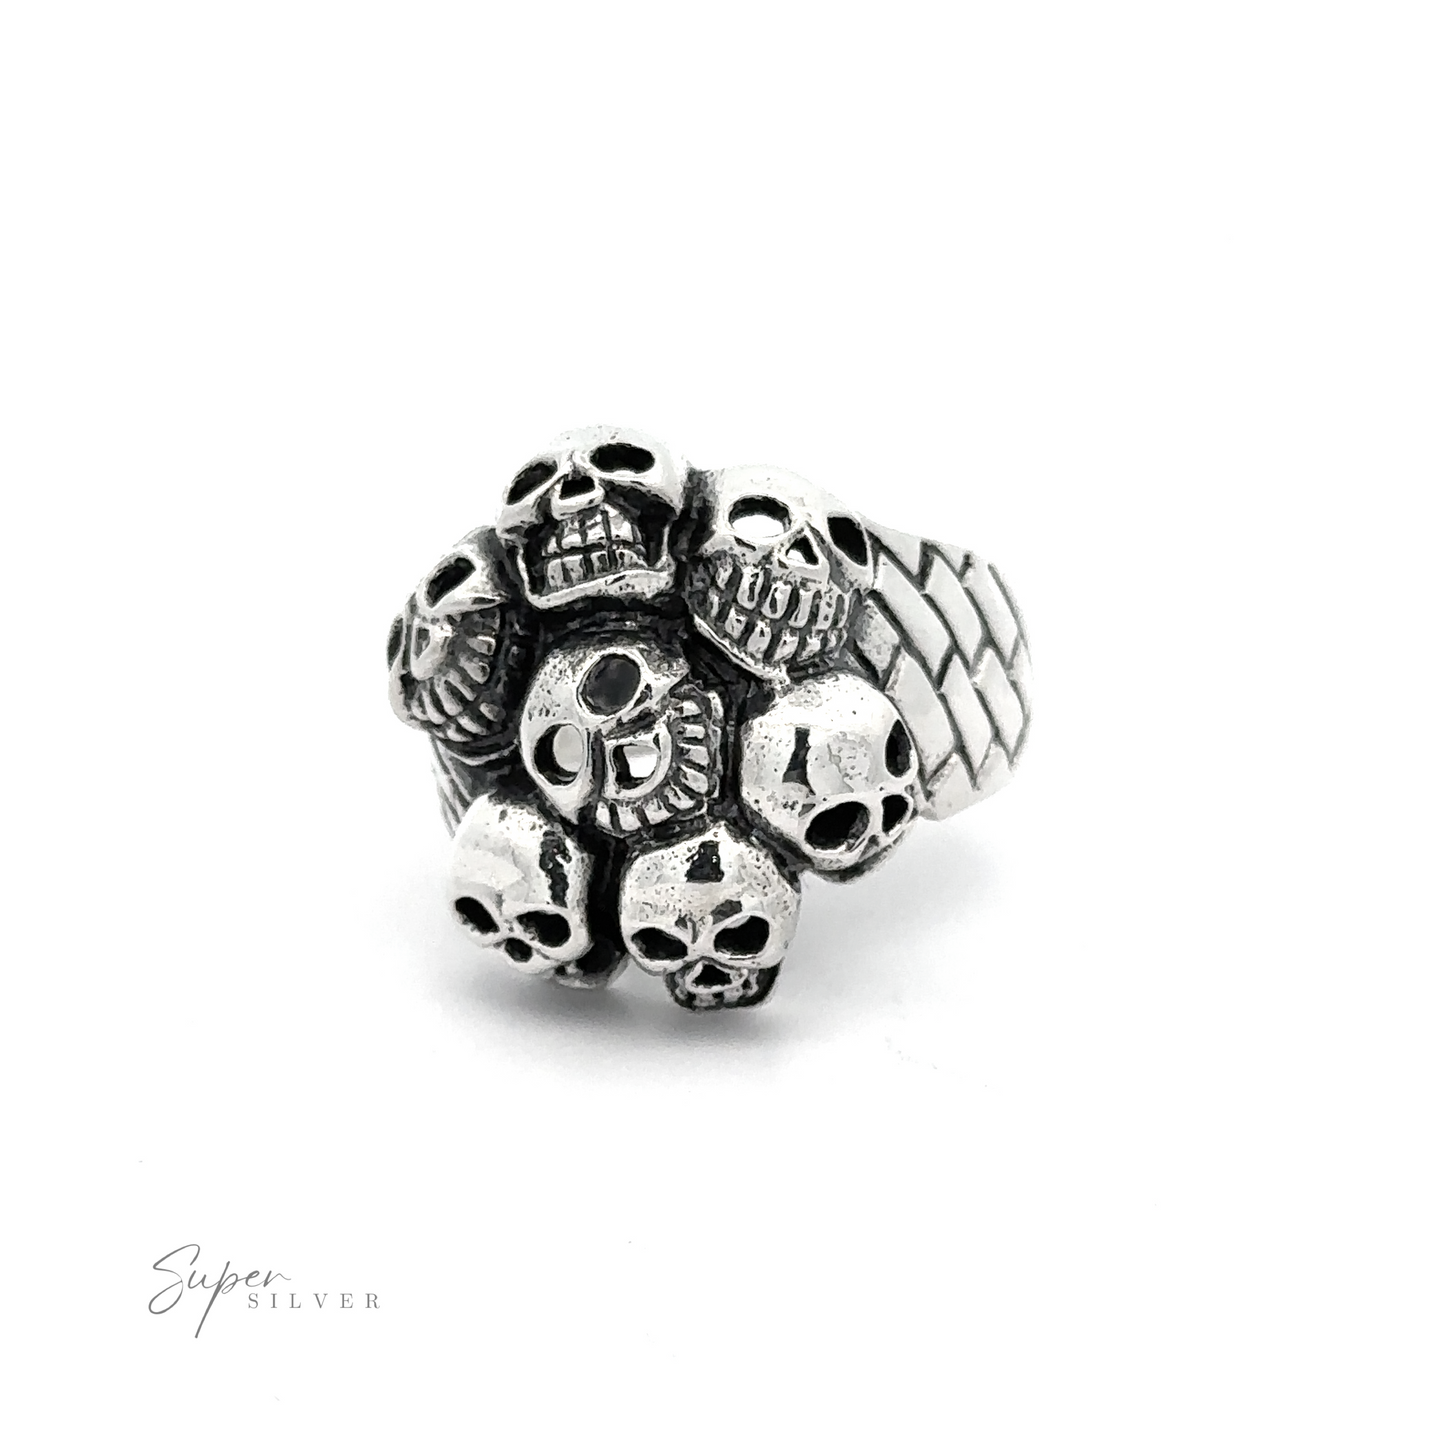 A Seven Grinning Skulls Ring featuring a cluster of small skulls on the band, displayed against a plain white background. The distinctive style and unique craftsmanship make it stand out. The brand “Super Silver” is noted in the bottom left corner.